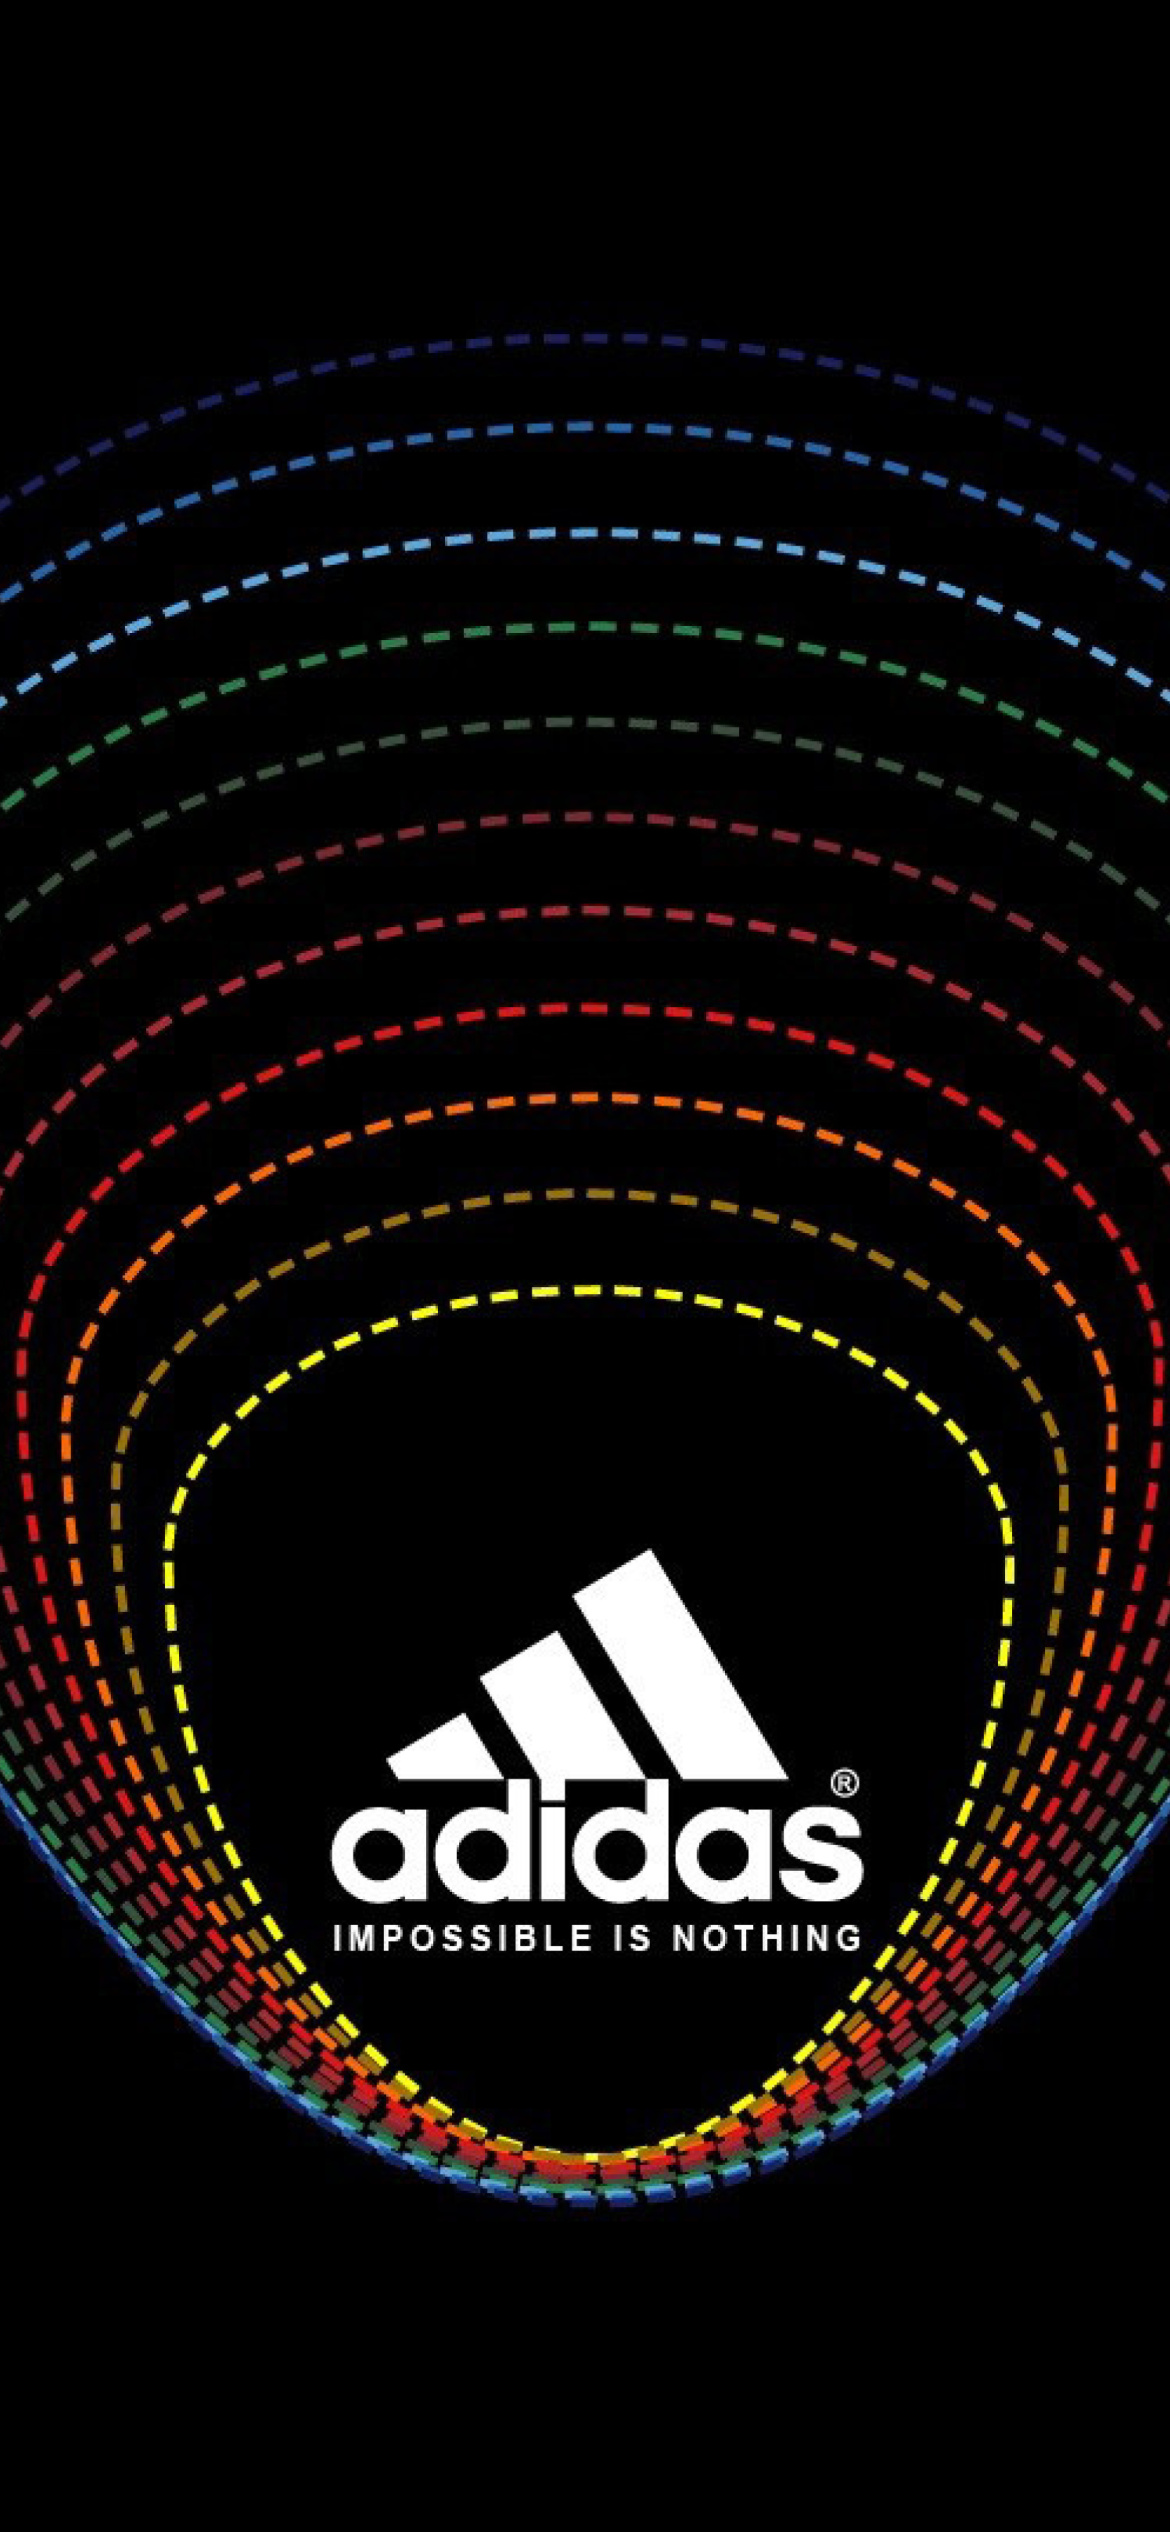 Adidas Tagline, Impossible is Nothing wallpaper 1170x2532